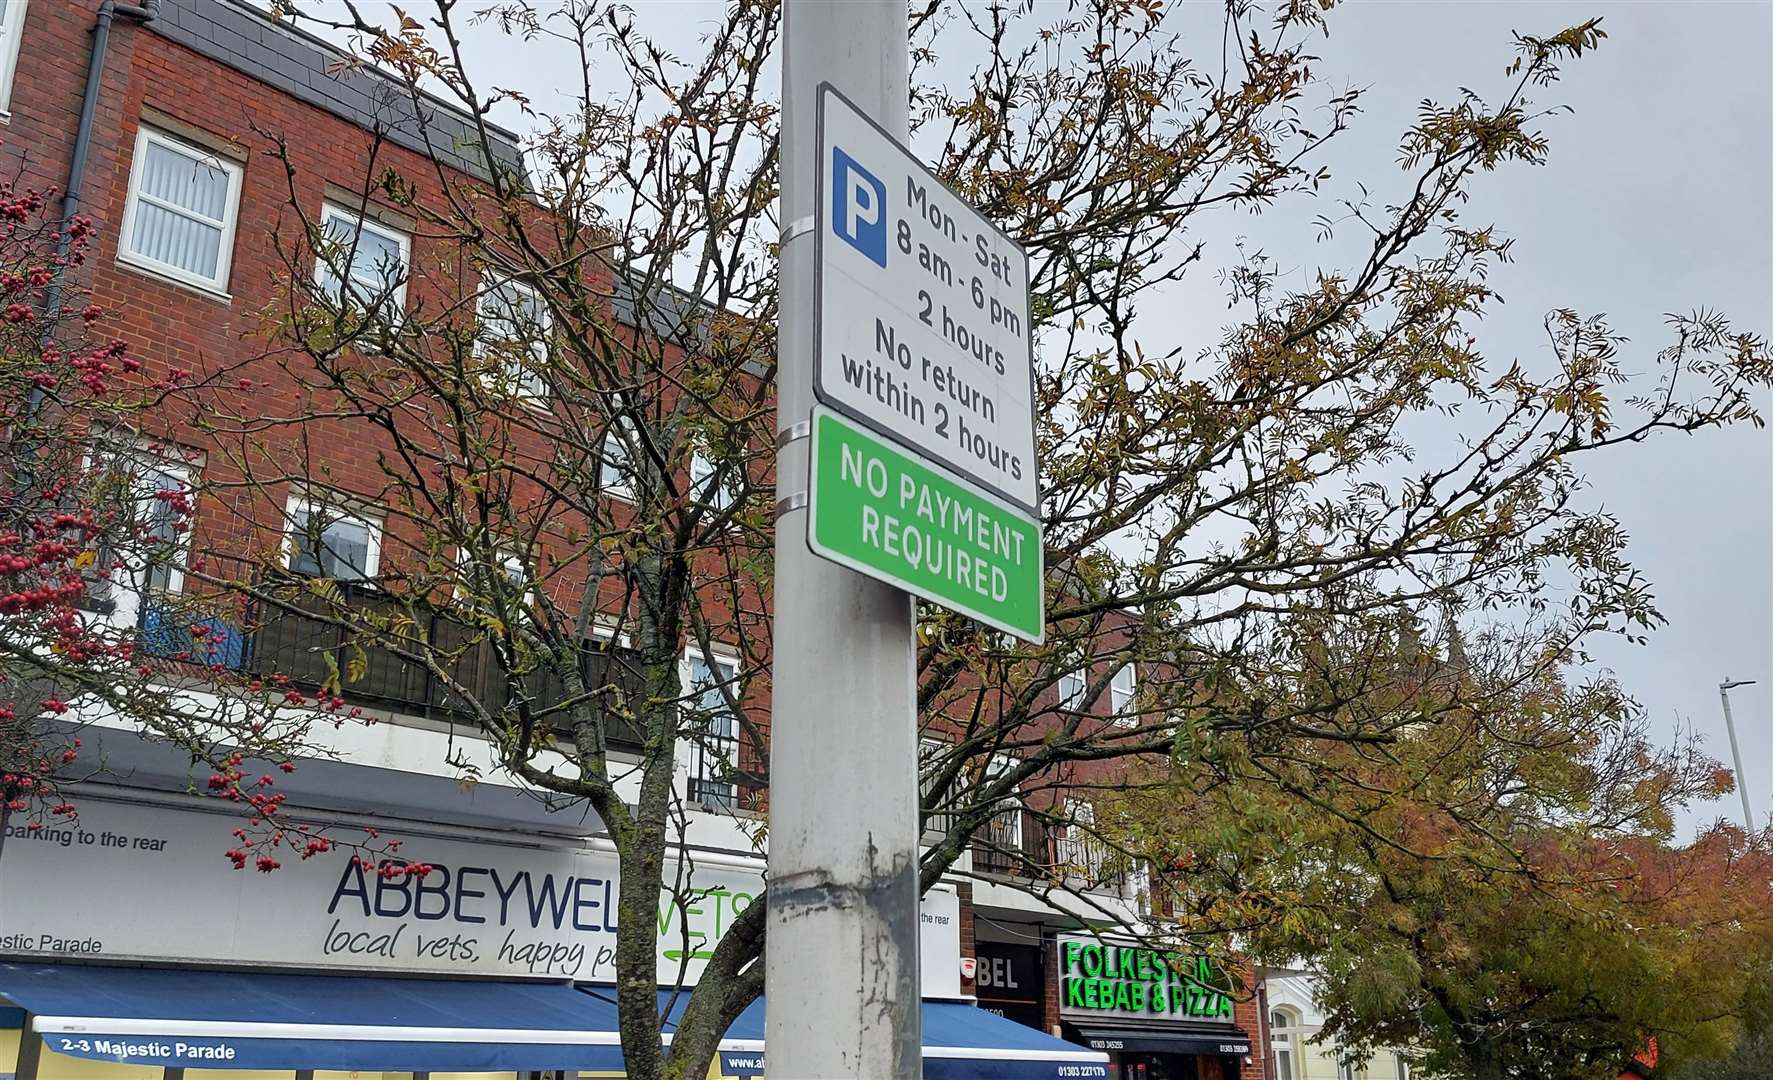 Two hours free parking is currently offered in Sandgate Road, Folkestone